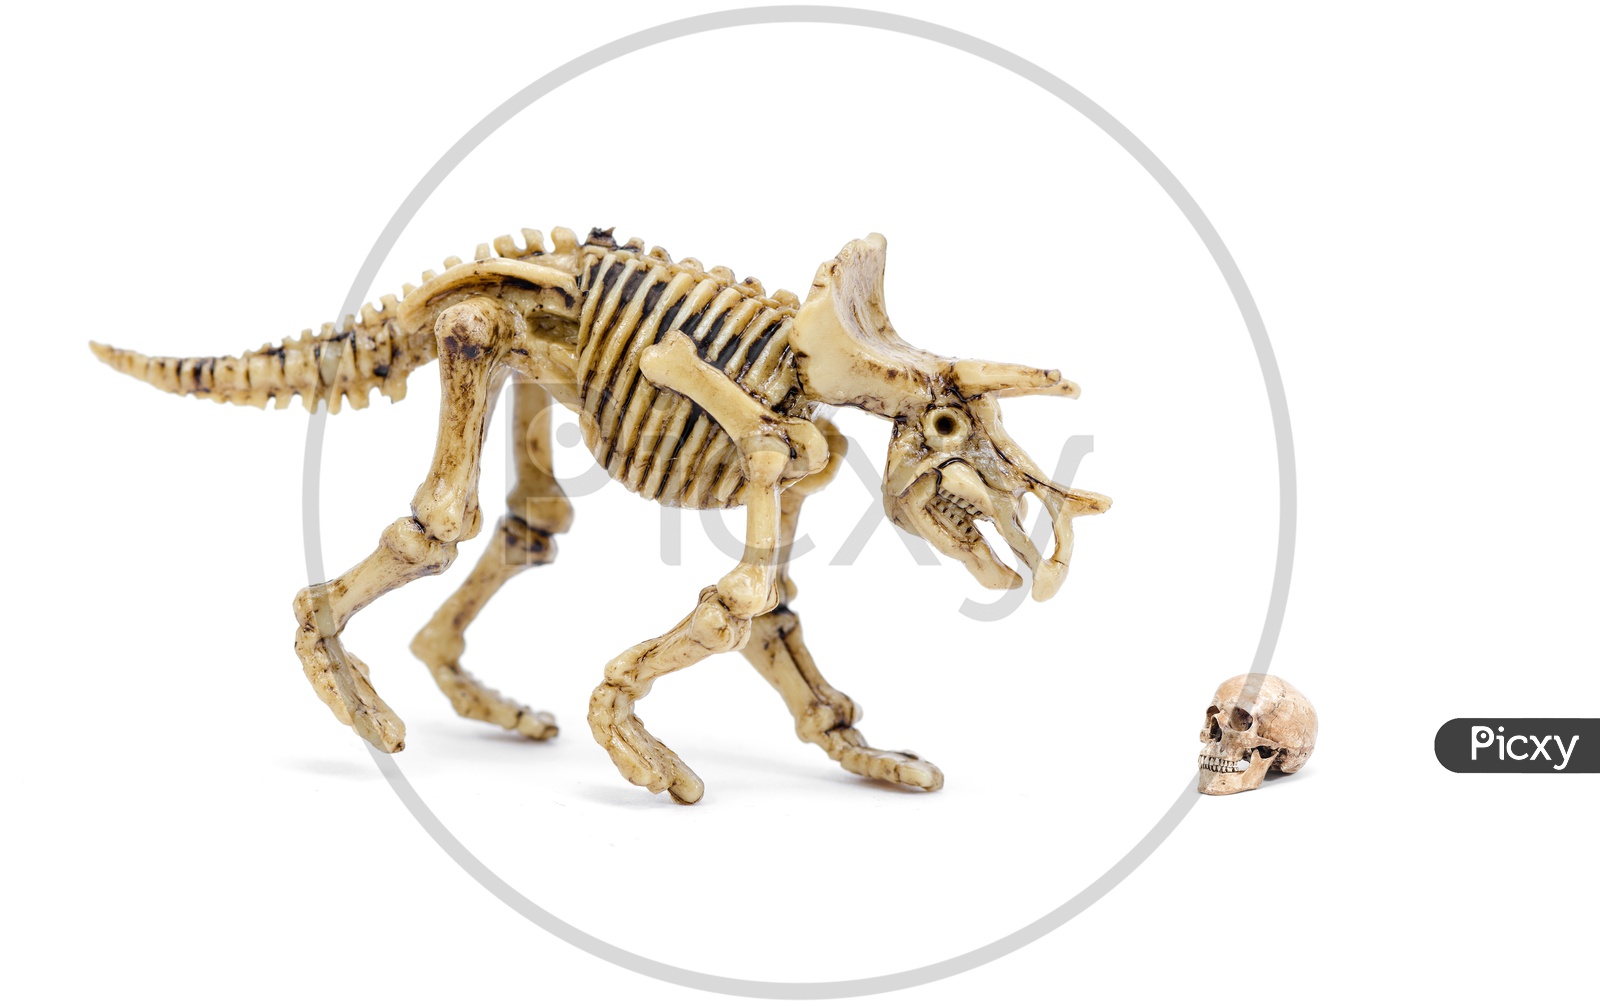 Dinosaur skeleton and Human Skull  Toy On an Isolated White Background